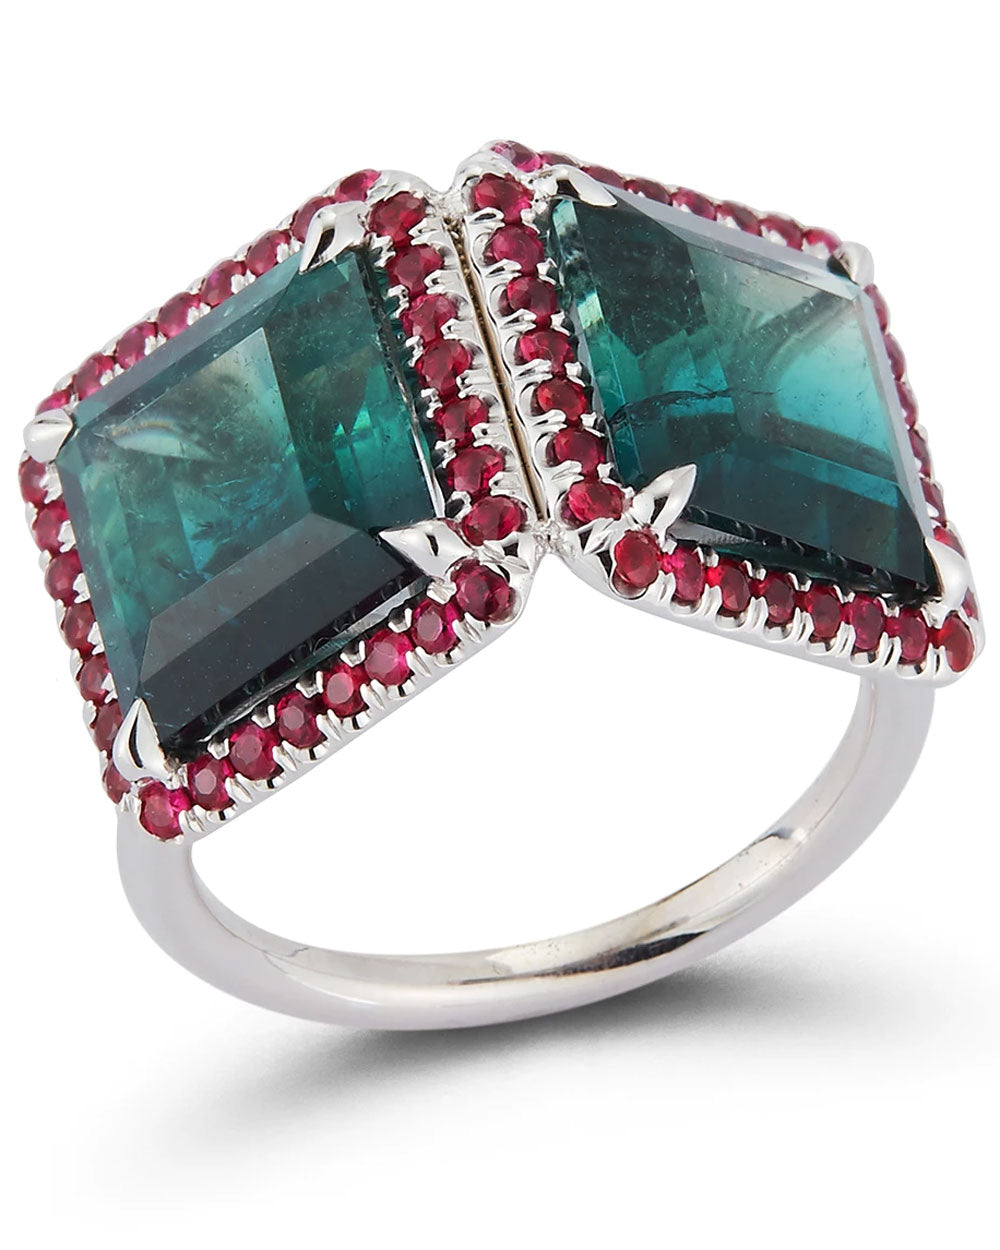 Bi Color Green Tourmaline and Ruby Ring